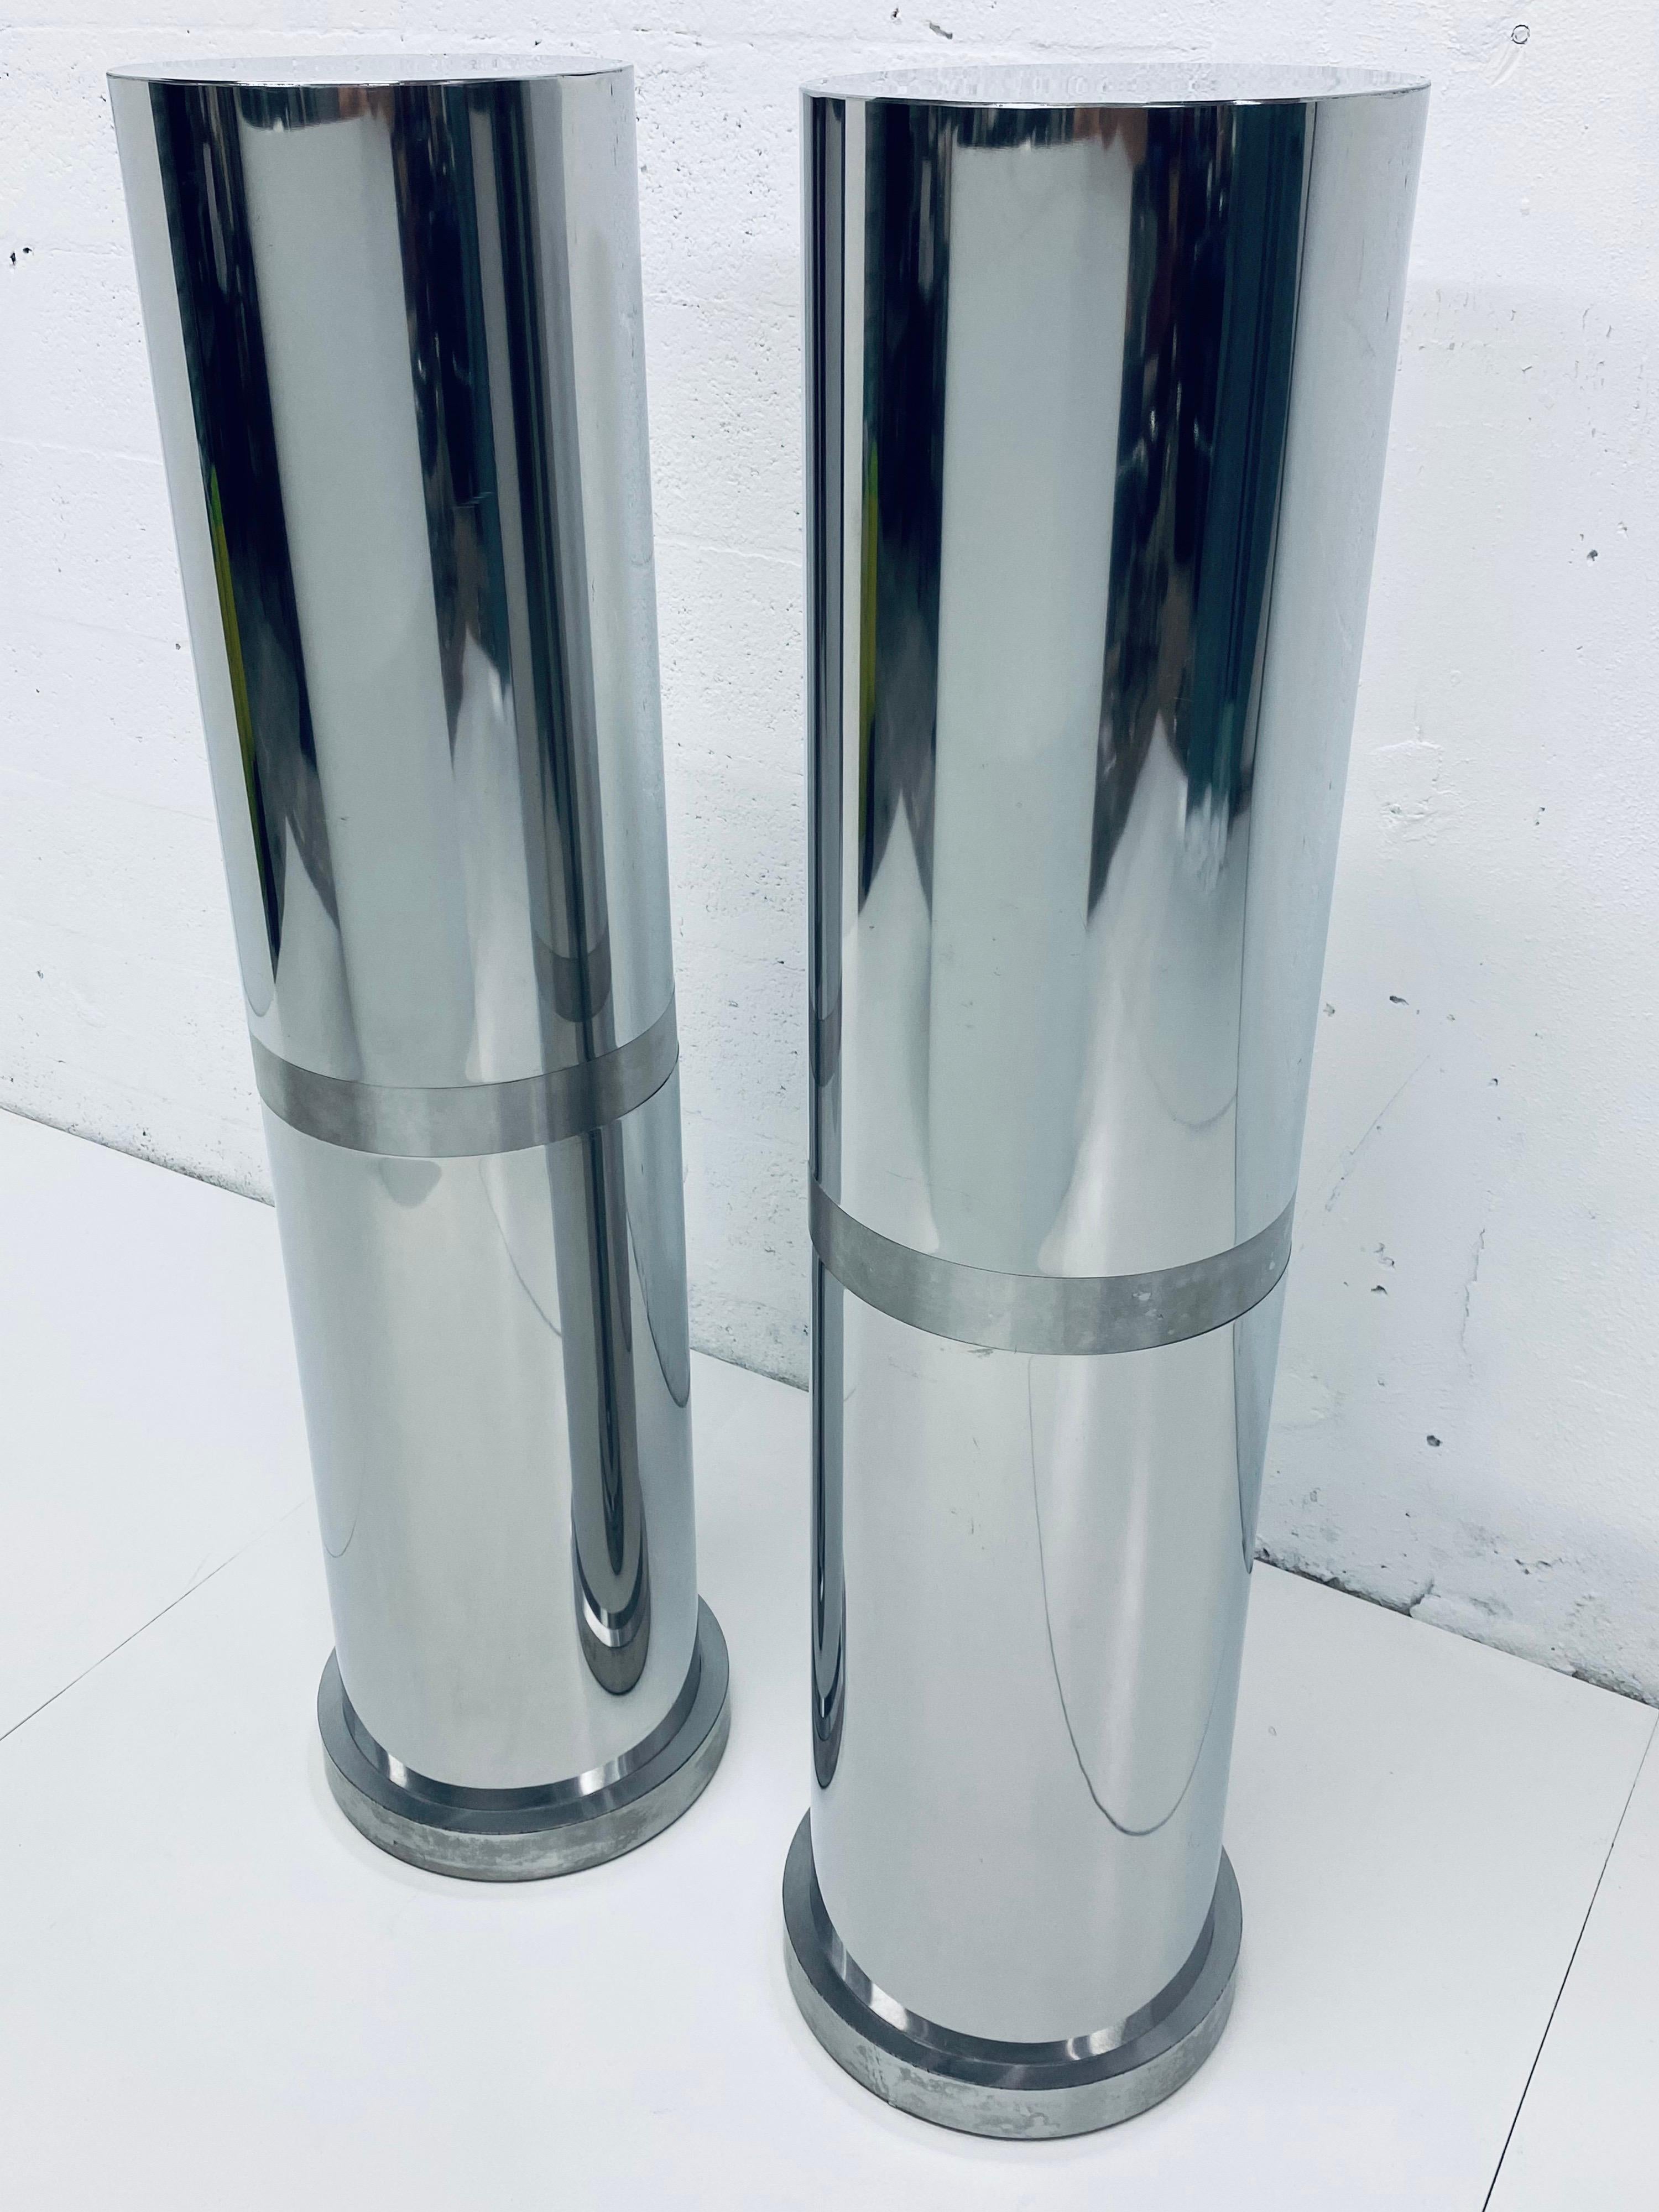 Two polished steel tall round pedestal tables or columns with brushed steel banding and chrome rivets from the 1970s.

Measures: Surface diameter: 12